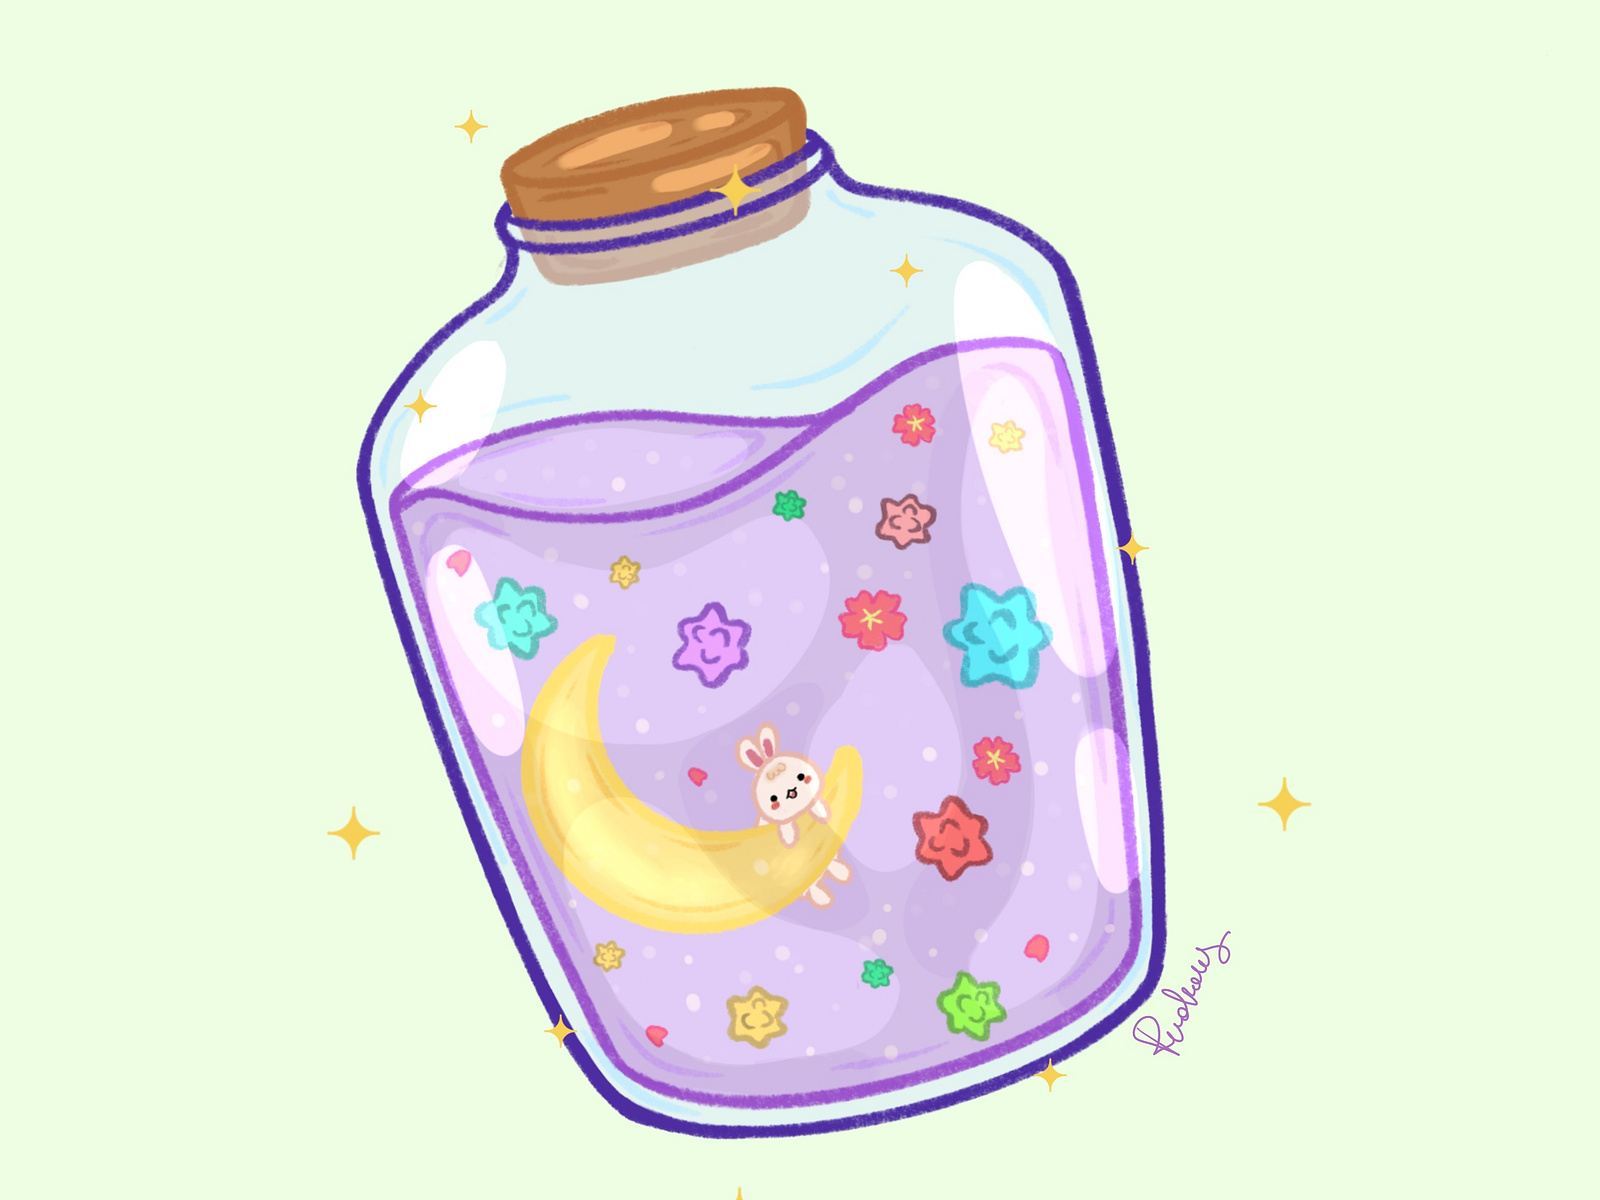 Cute poison by Elena on Dribbble